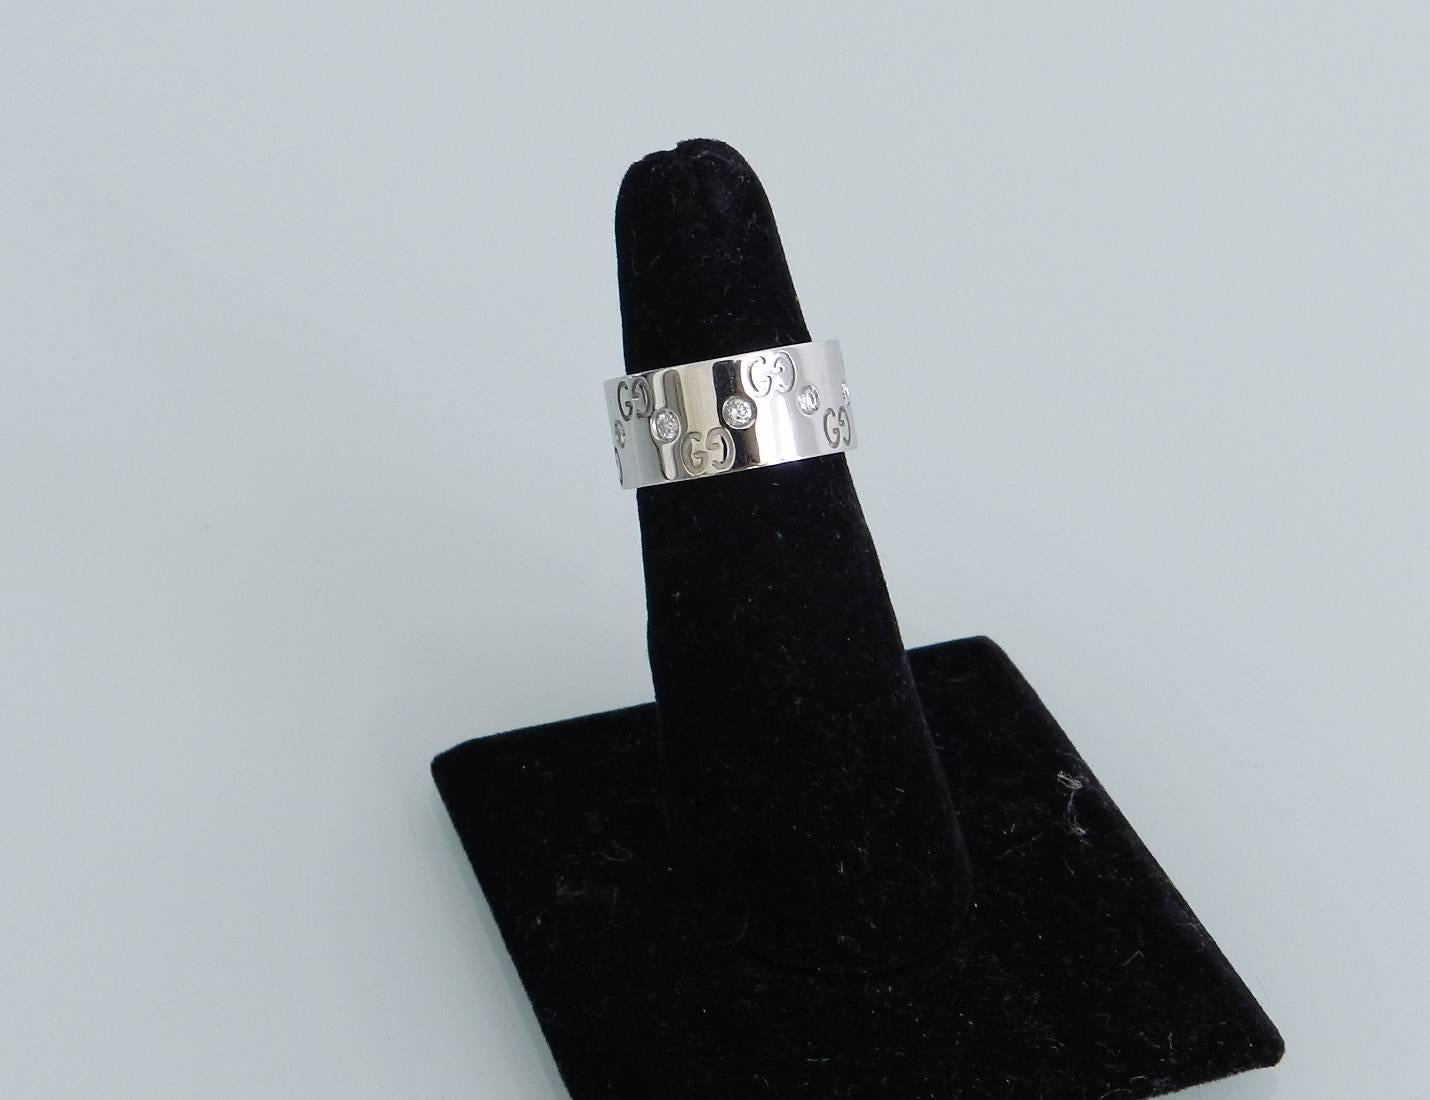 Gucci 18k white gold and diamond icon ring.  Size 6.  Measures 3/8